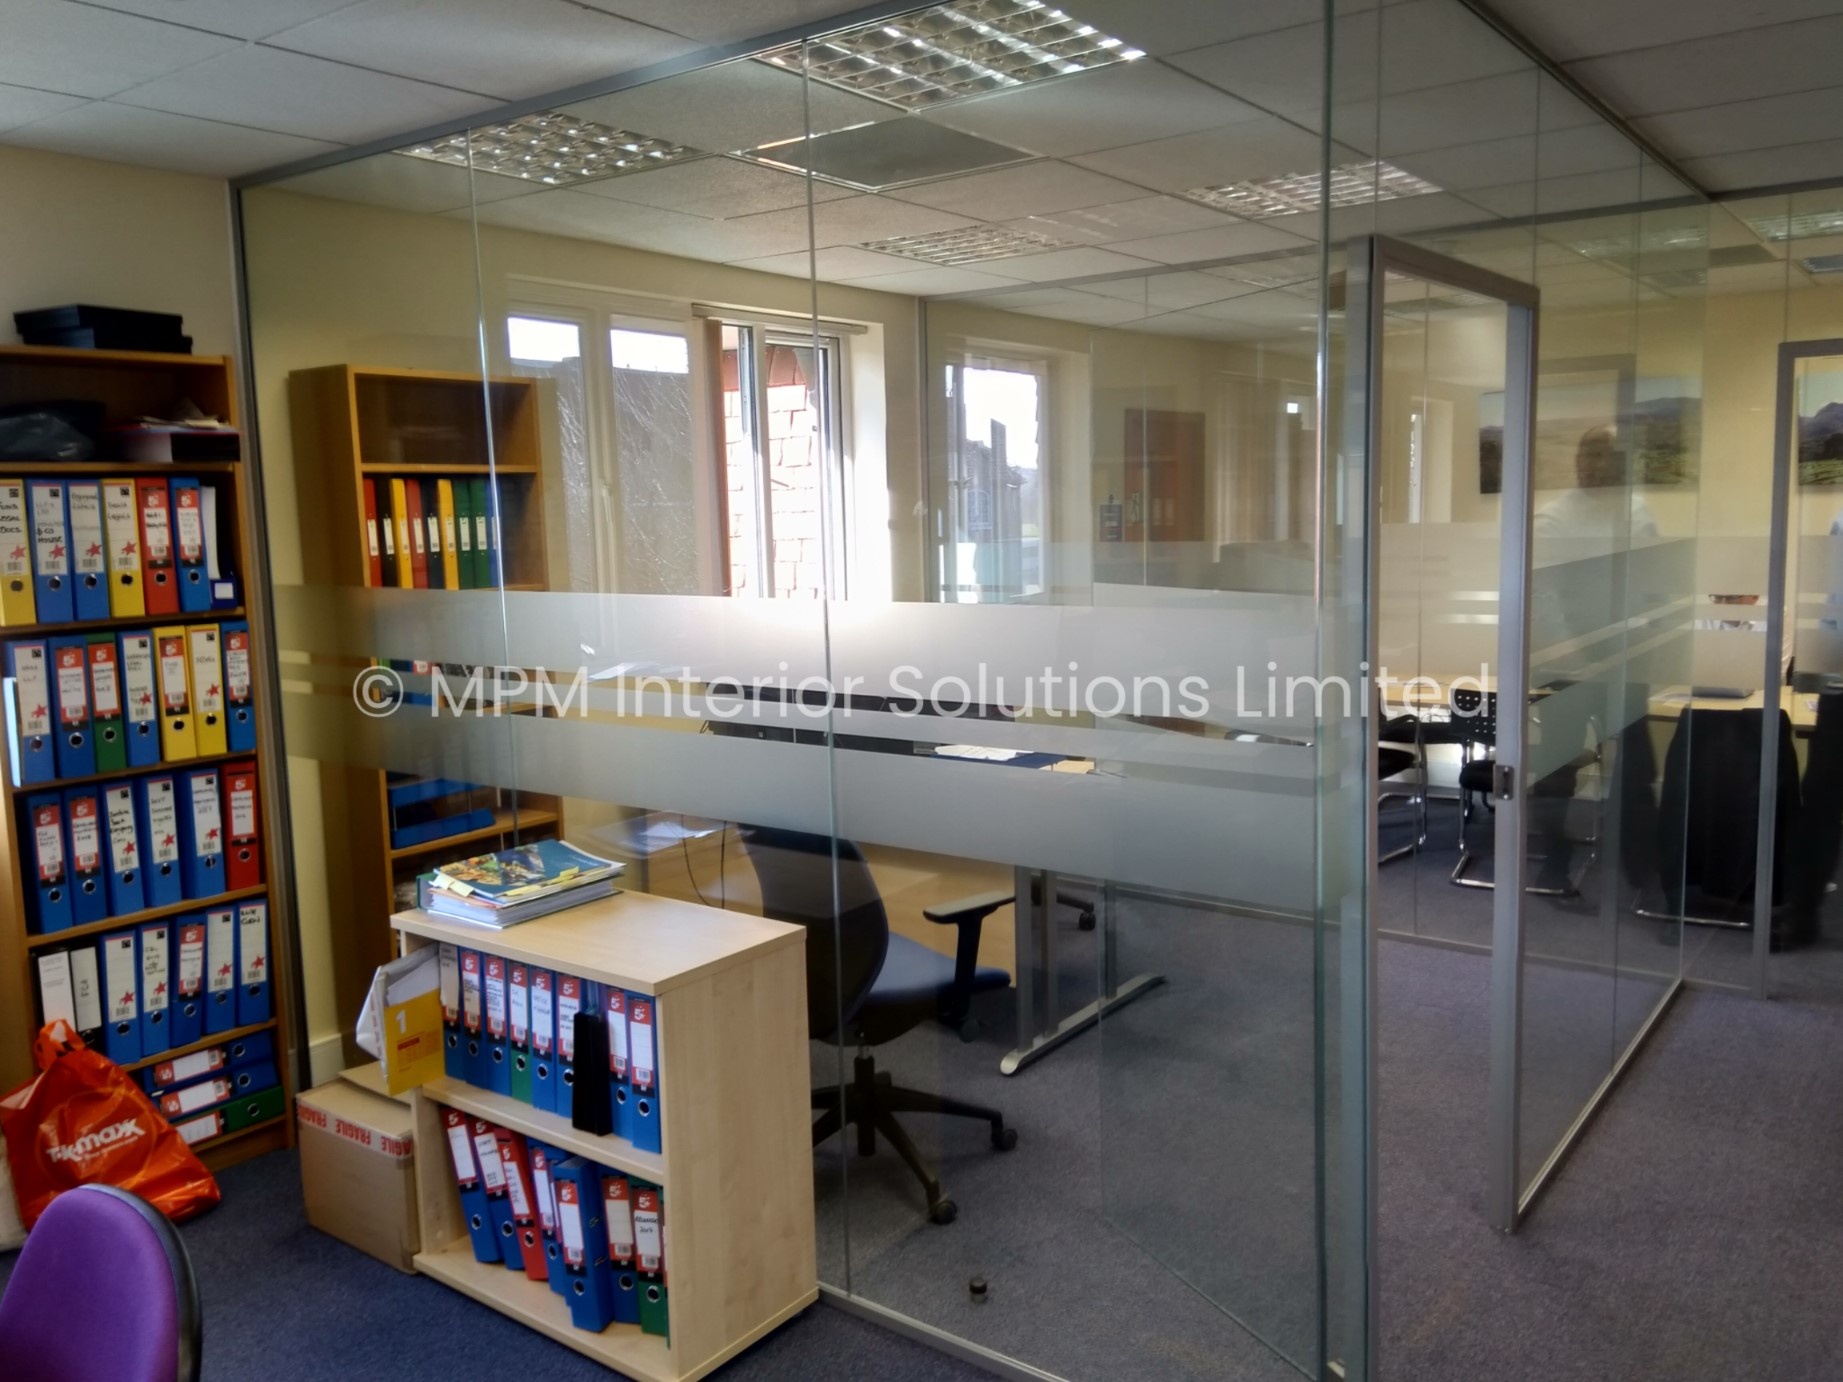 Frameless Glass Office Partitioning, Office Refurbishment/Fit-Out, Silverstreet Capital LLP (Cobham, Surrey), MPM Interior Solutions Limited